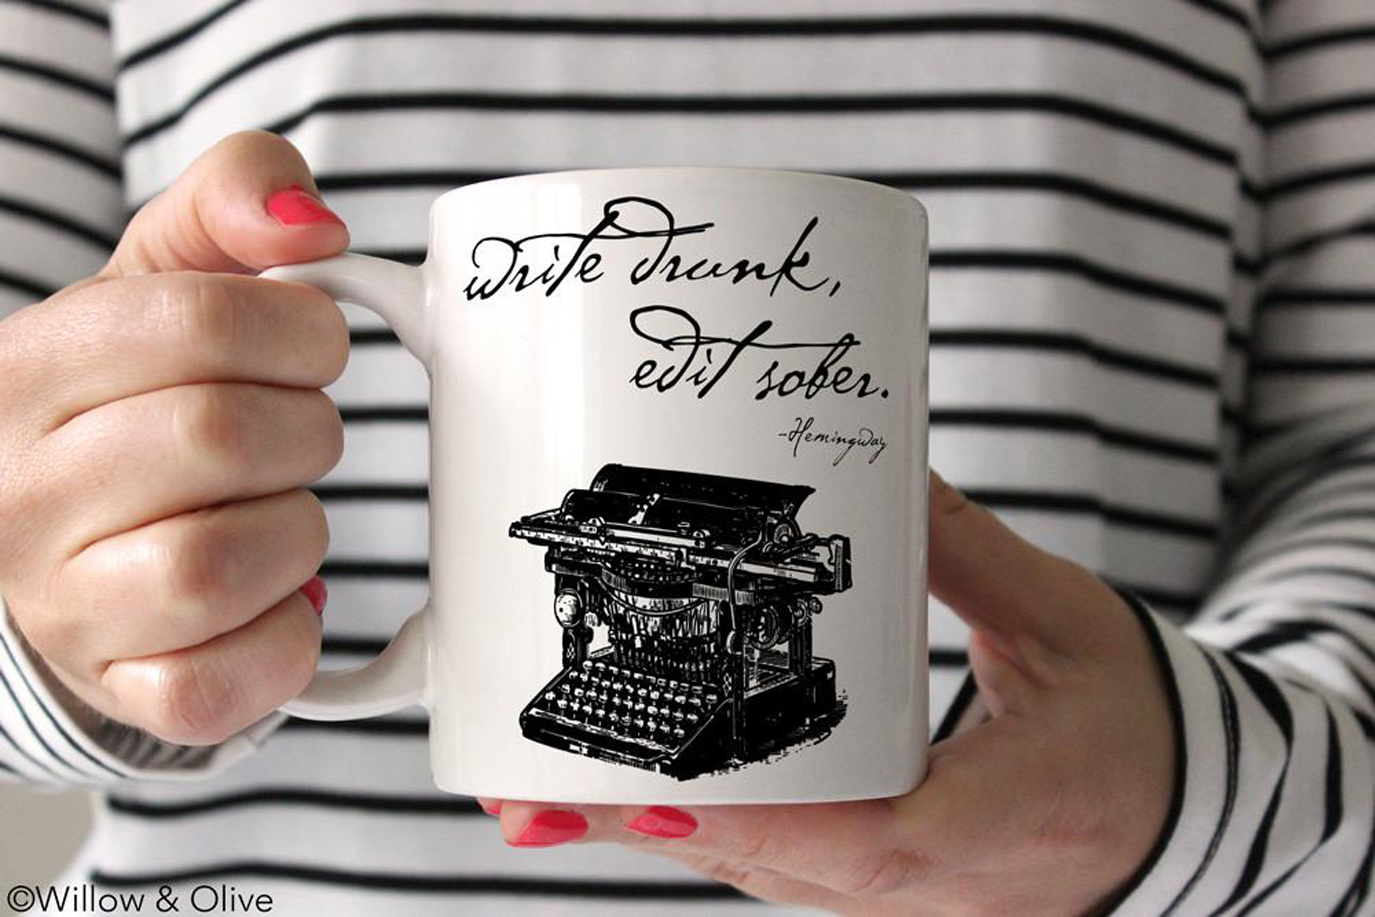 Another Left Bank Writers Retreat gift idea, Willow & Olive ceramic mugs can be personalized with a favorite author’s quote, including Hemingway’s famous “Write drunk, edit sober.”